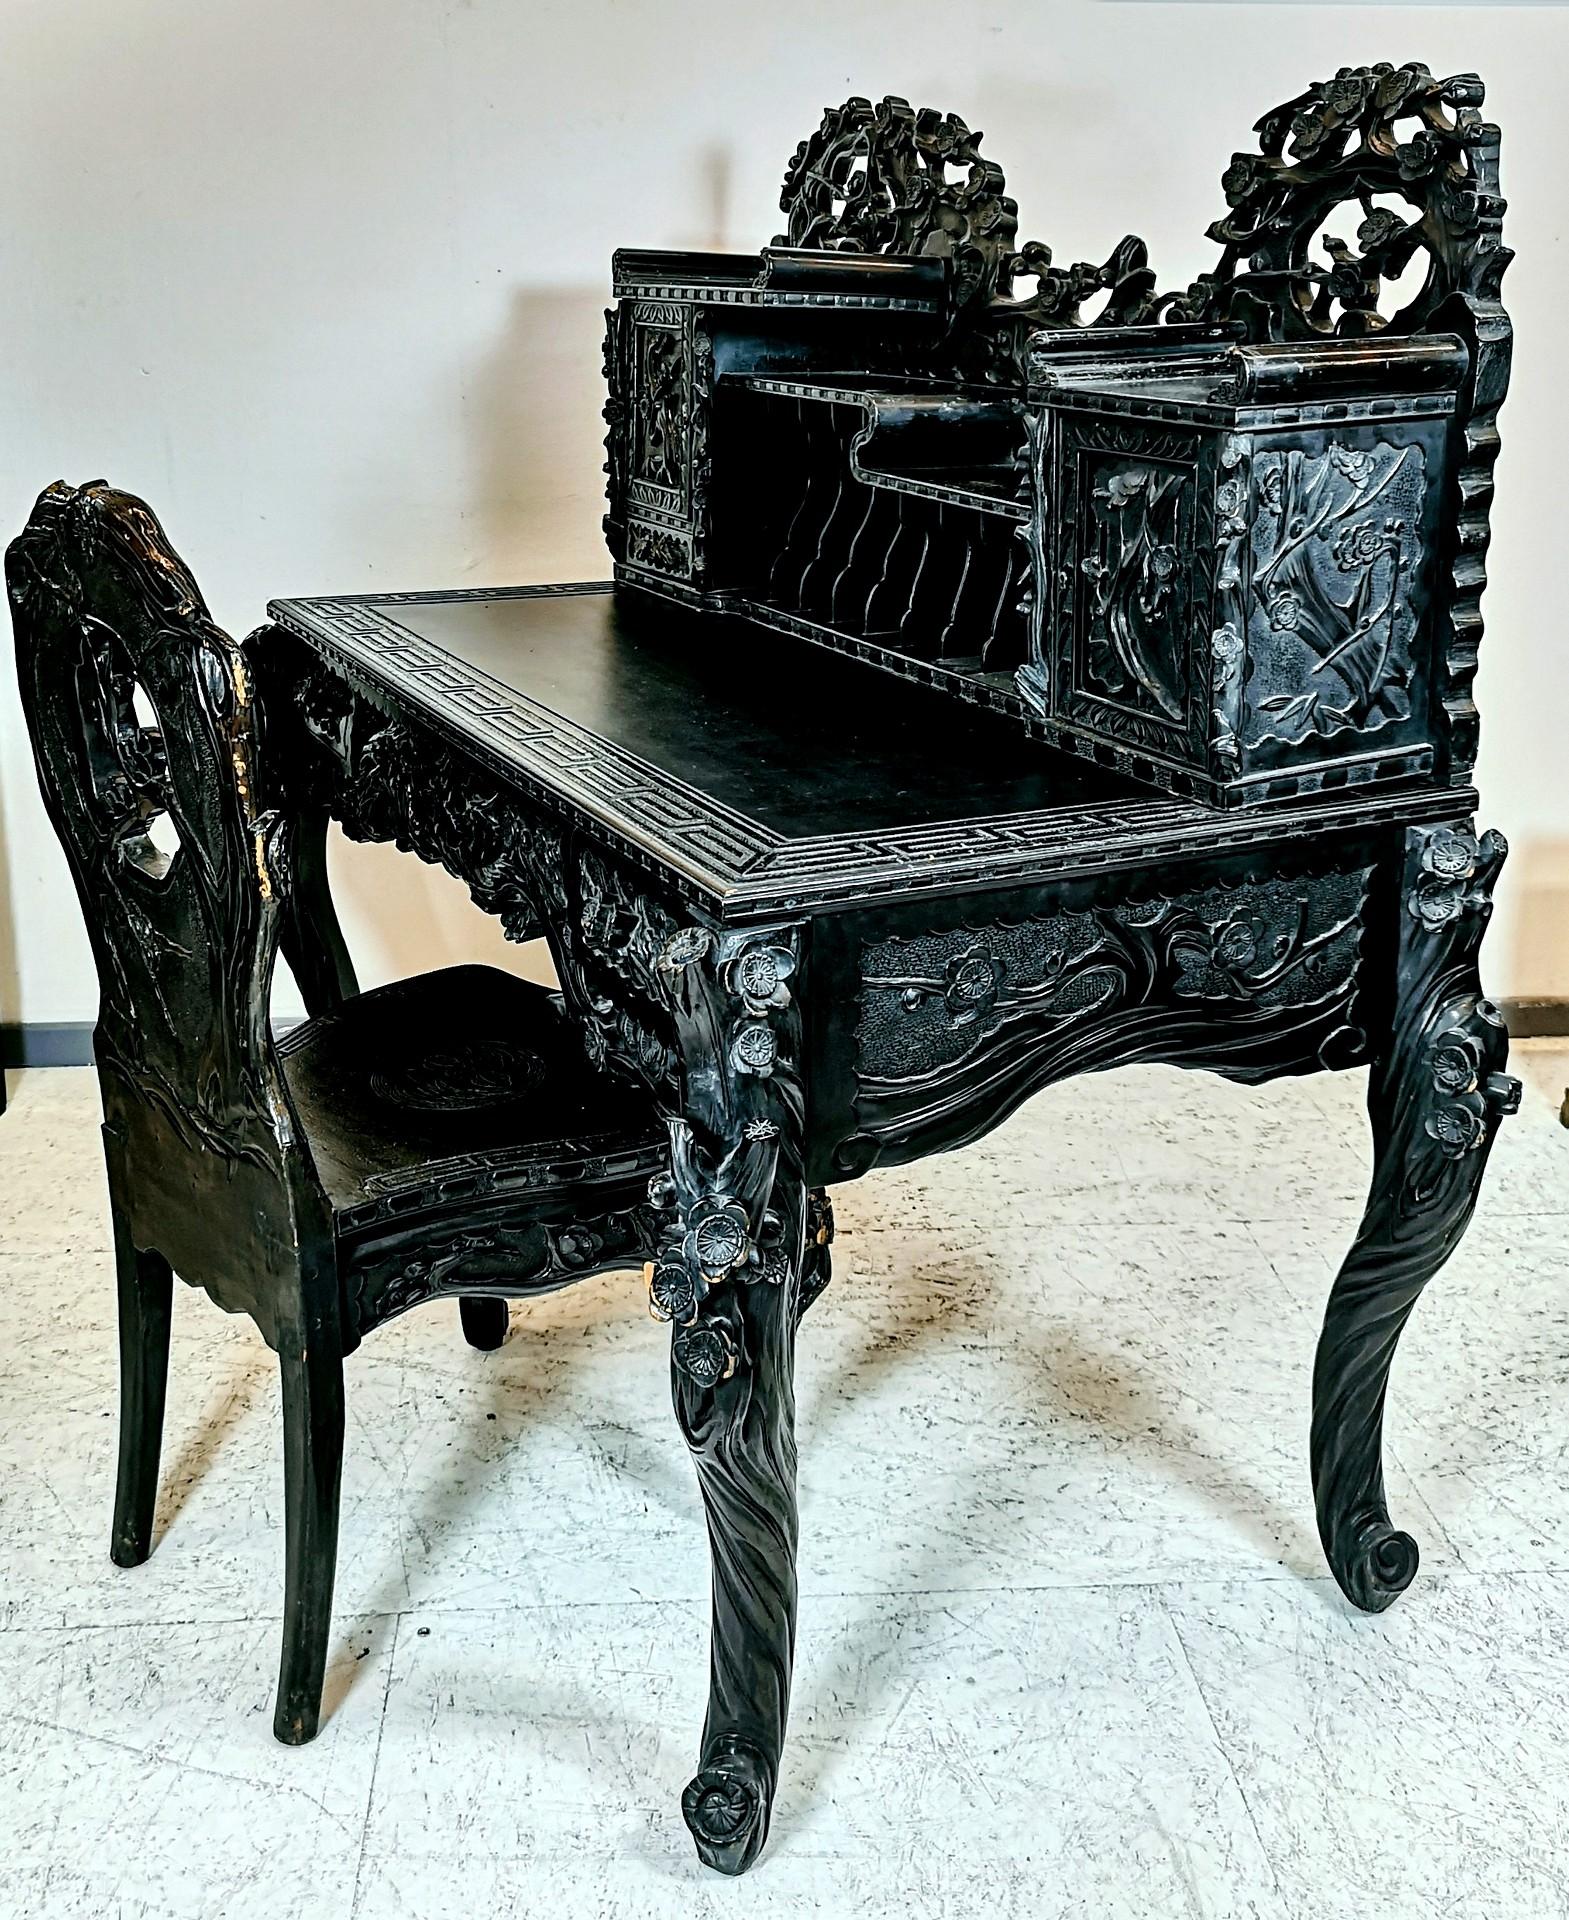 We are delighted to offer for sale this stunning hand carved Chinese export desk and matching chair.
The carving is ornate, sublime and exquisite, there is something interesting to see from every angle.
The set is from circa 1900s. In vintage